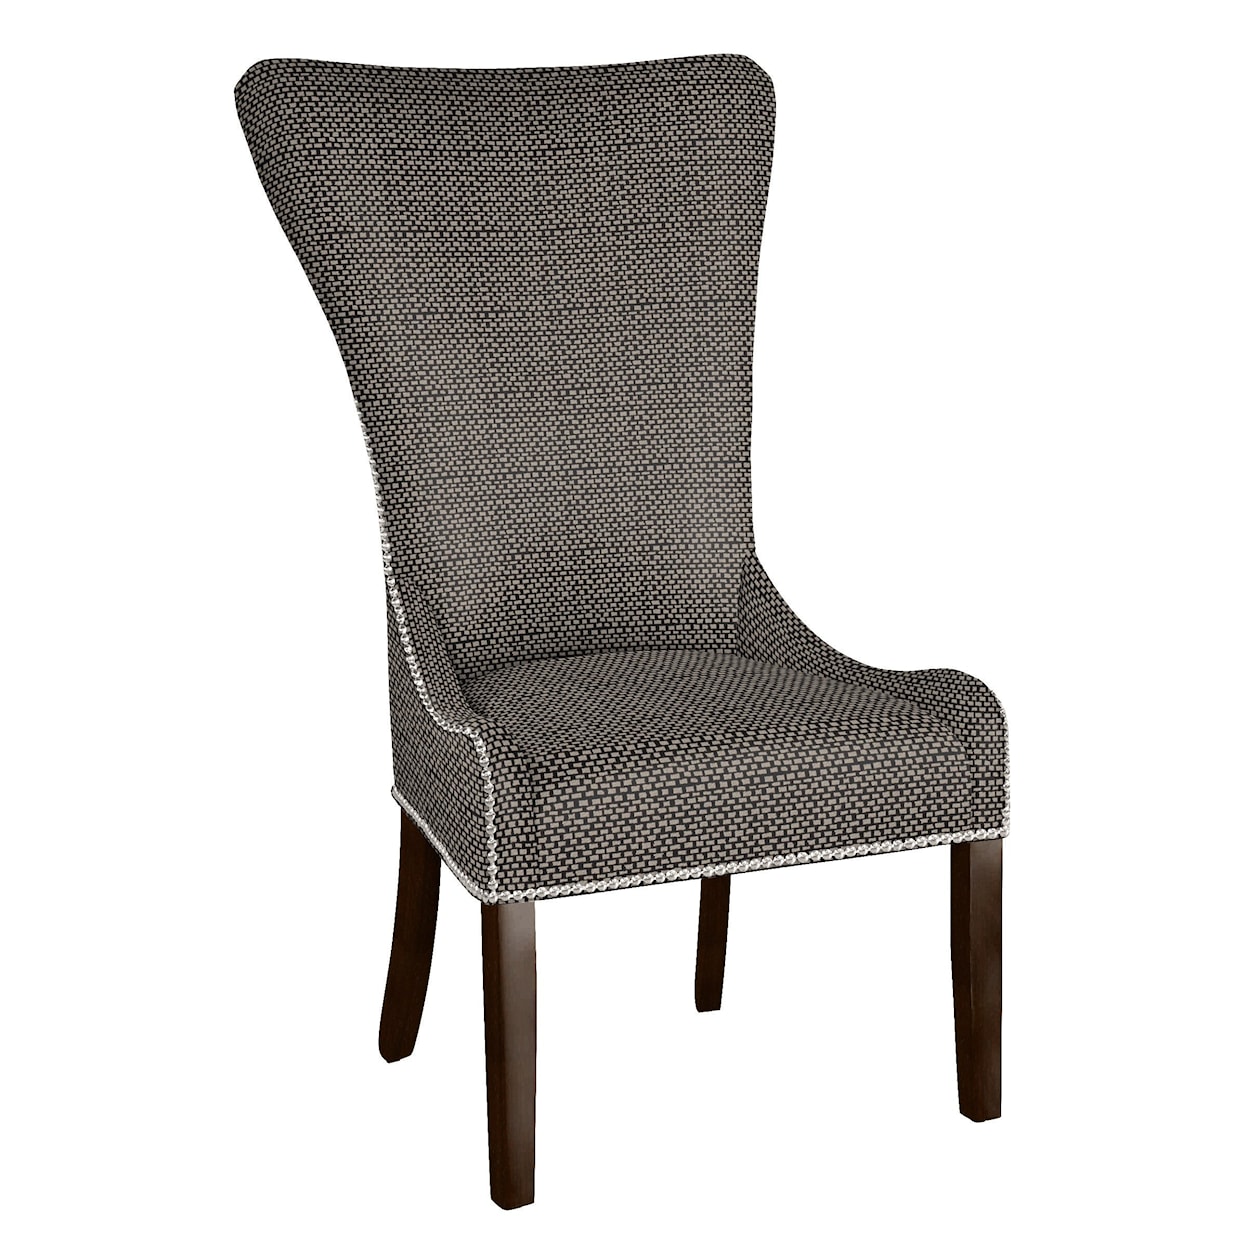 Hekman Upholstery Christine Hostess Chair with Nailheads